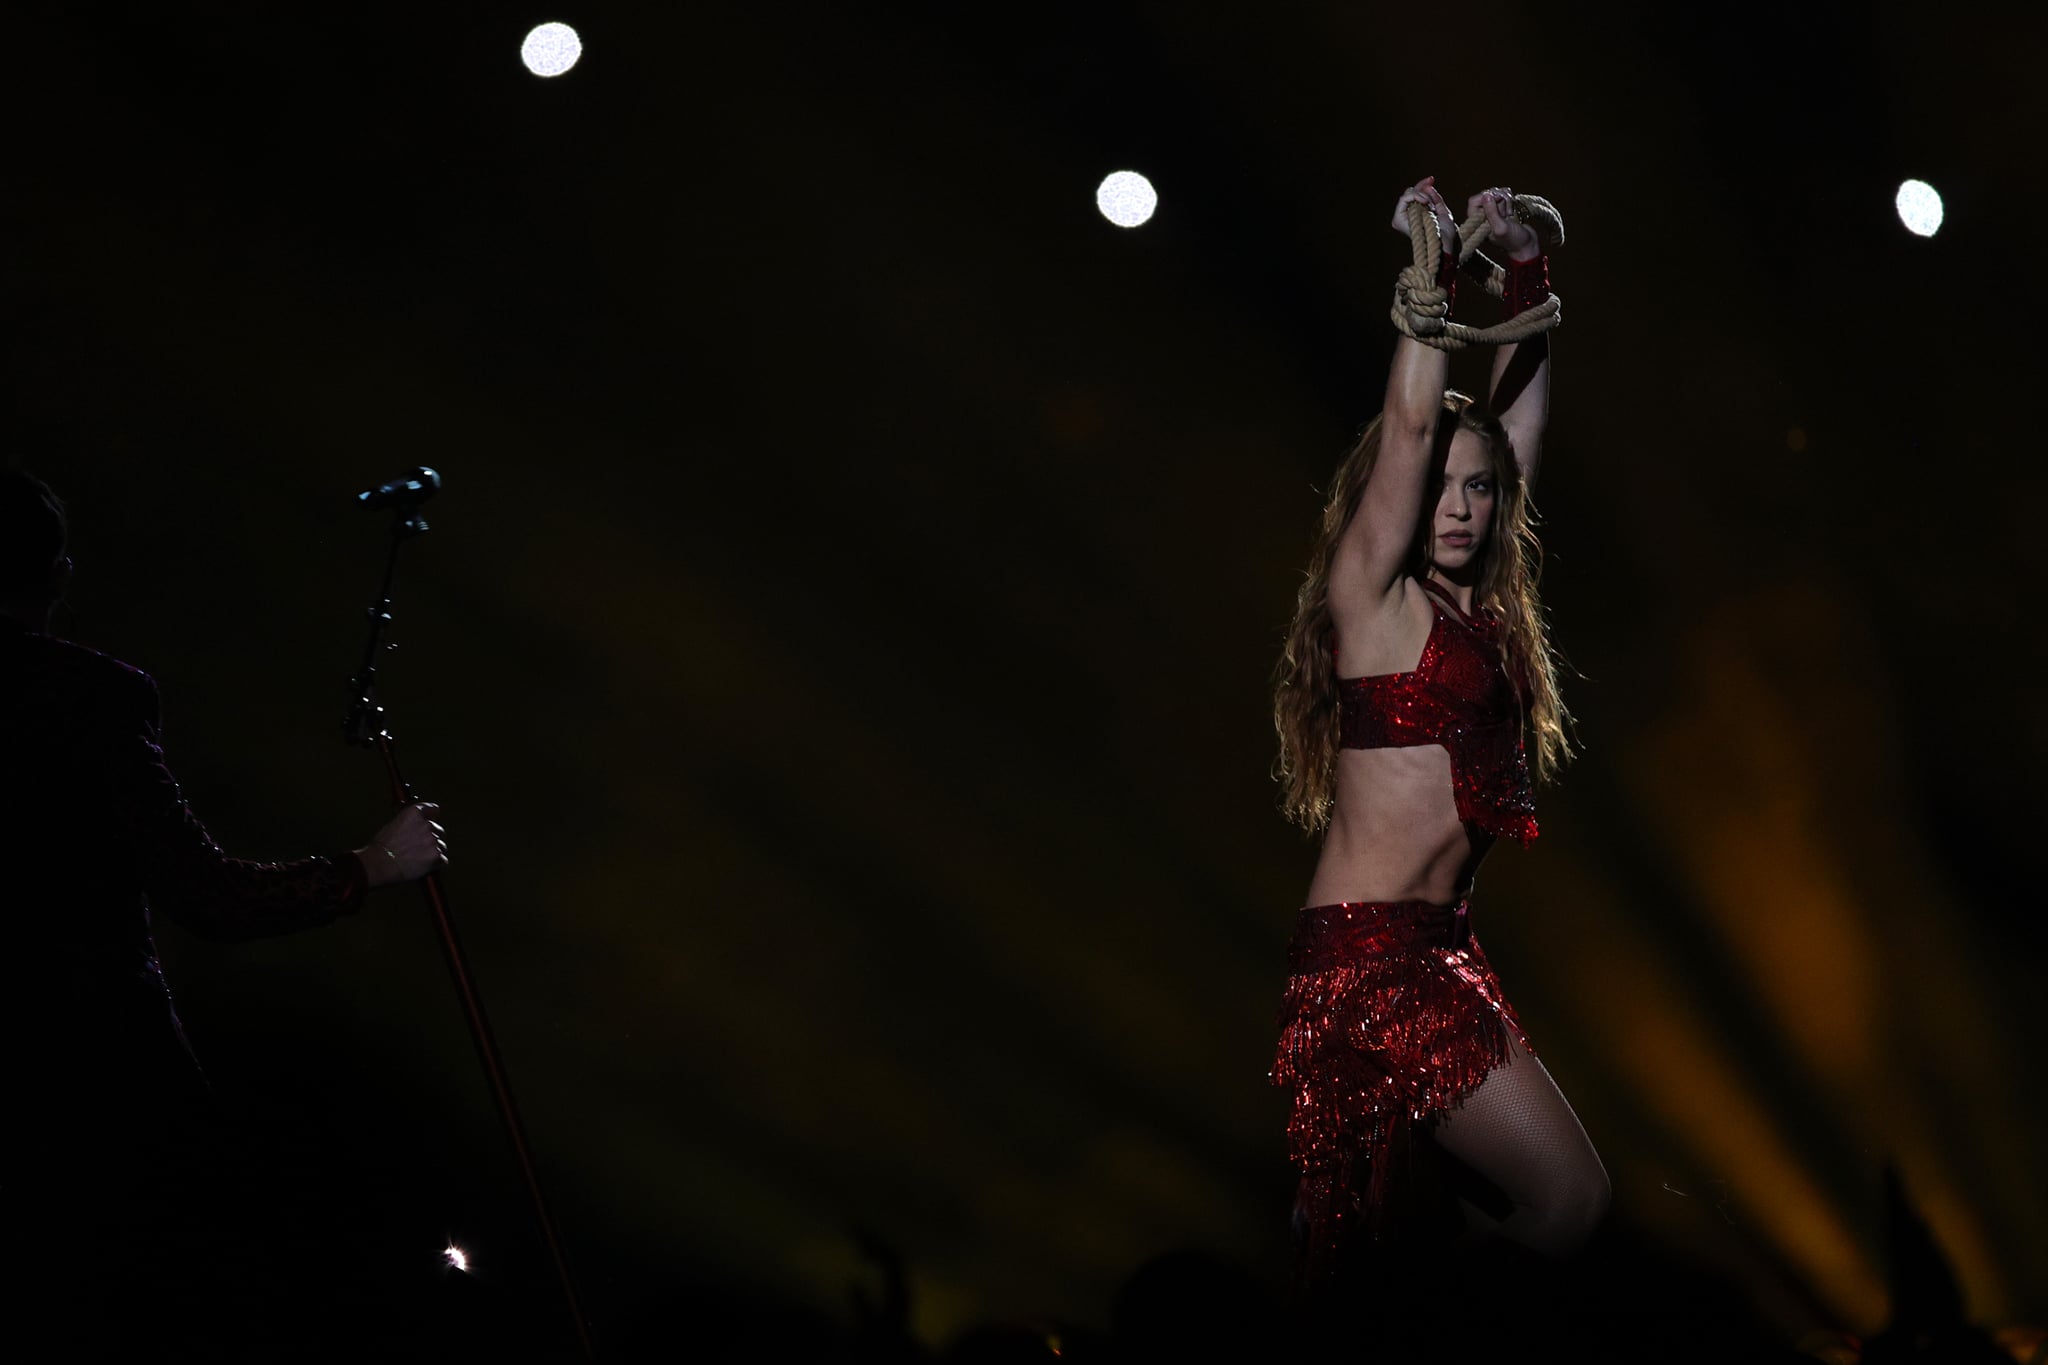 MIAMI, FLORIDA - FEBRUARY 02: Colombian singer Shakira performs during the Pepsi Super Bowl LIV Halftime Show at Hard Rock Stadium on February 02, 2020 in Miami, Florida. (Photo by Maddie Meyer/Getty Images)